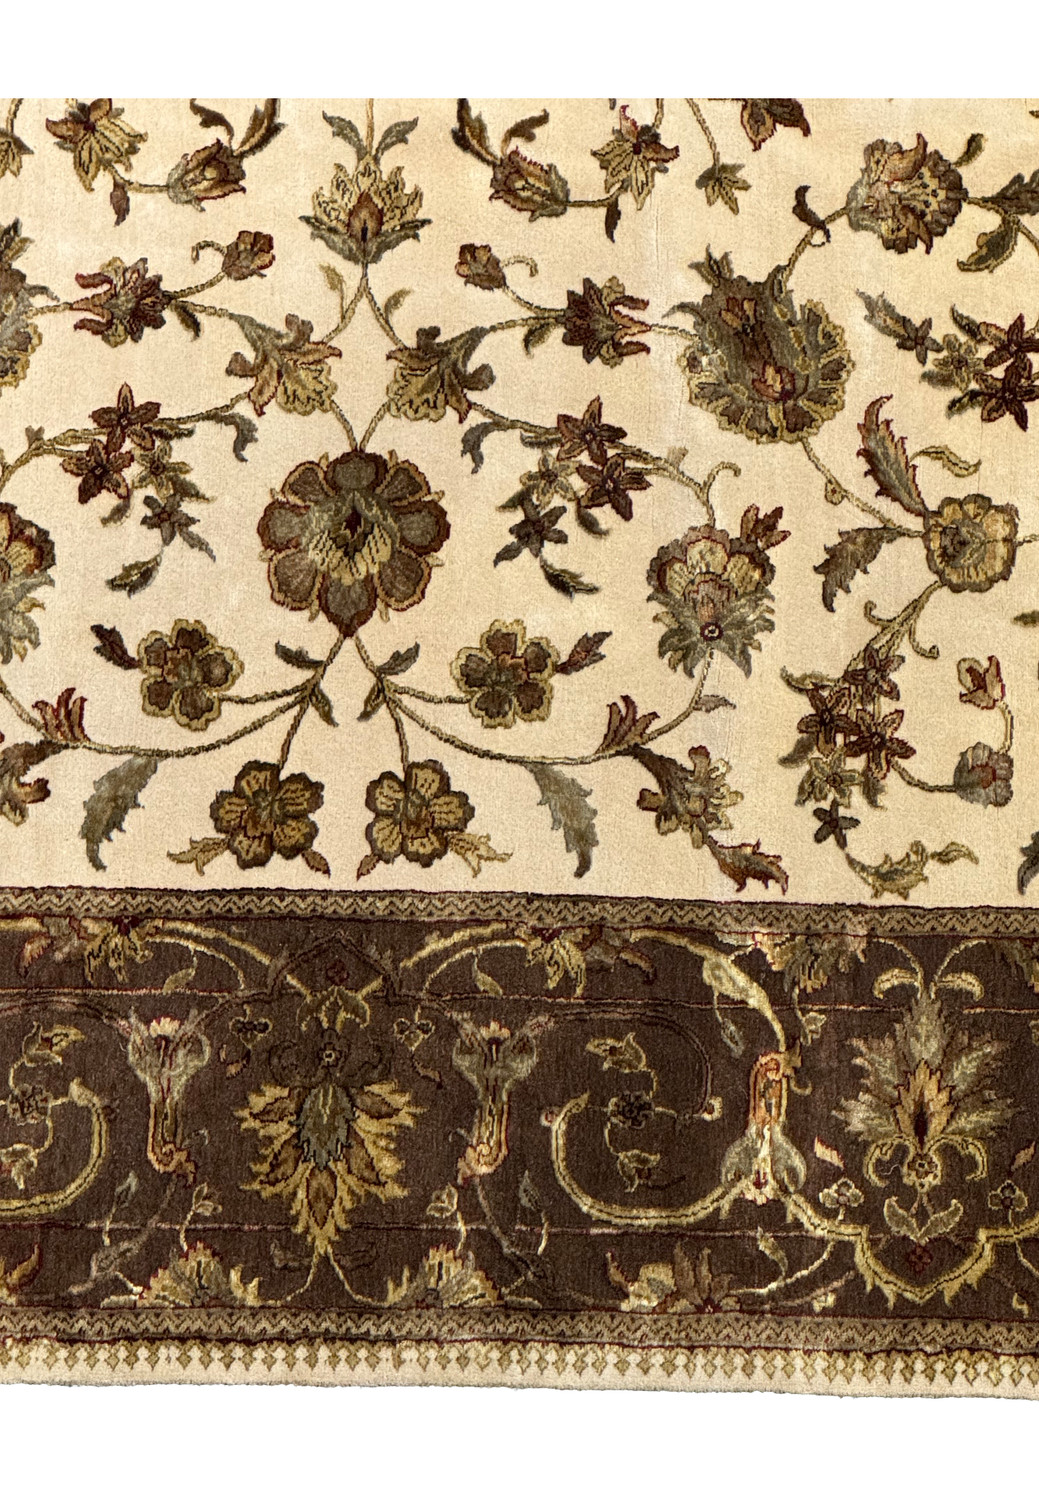 A detailed view of the Chobi rug's central field with a dense floral pattern in earthy tones of brown, green, and burgundy on a creamy beige base.